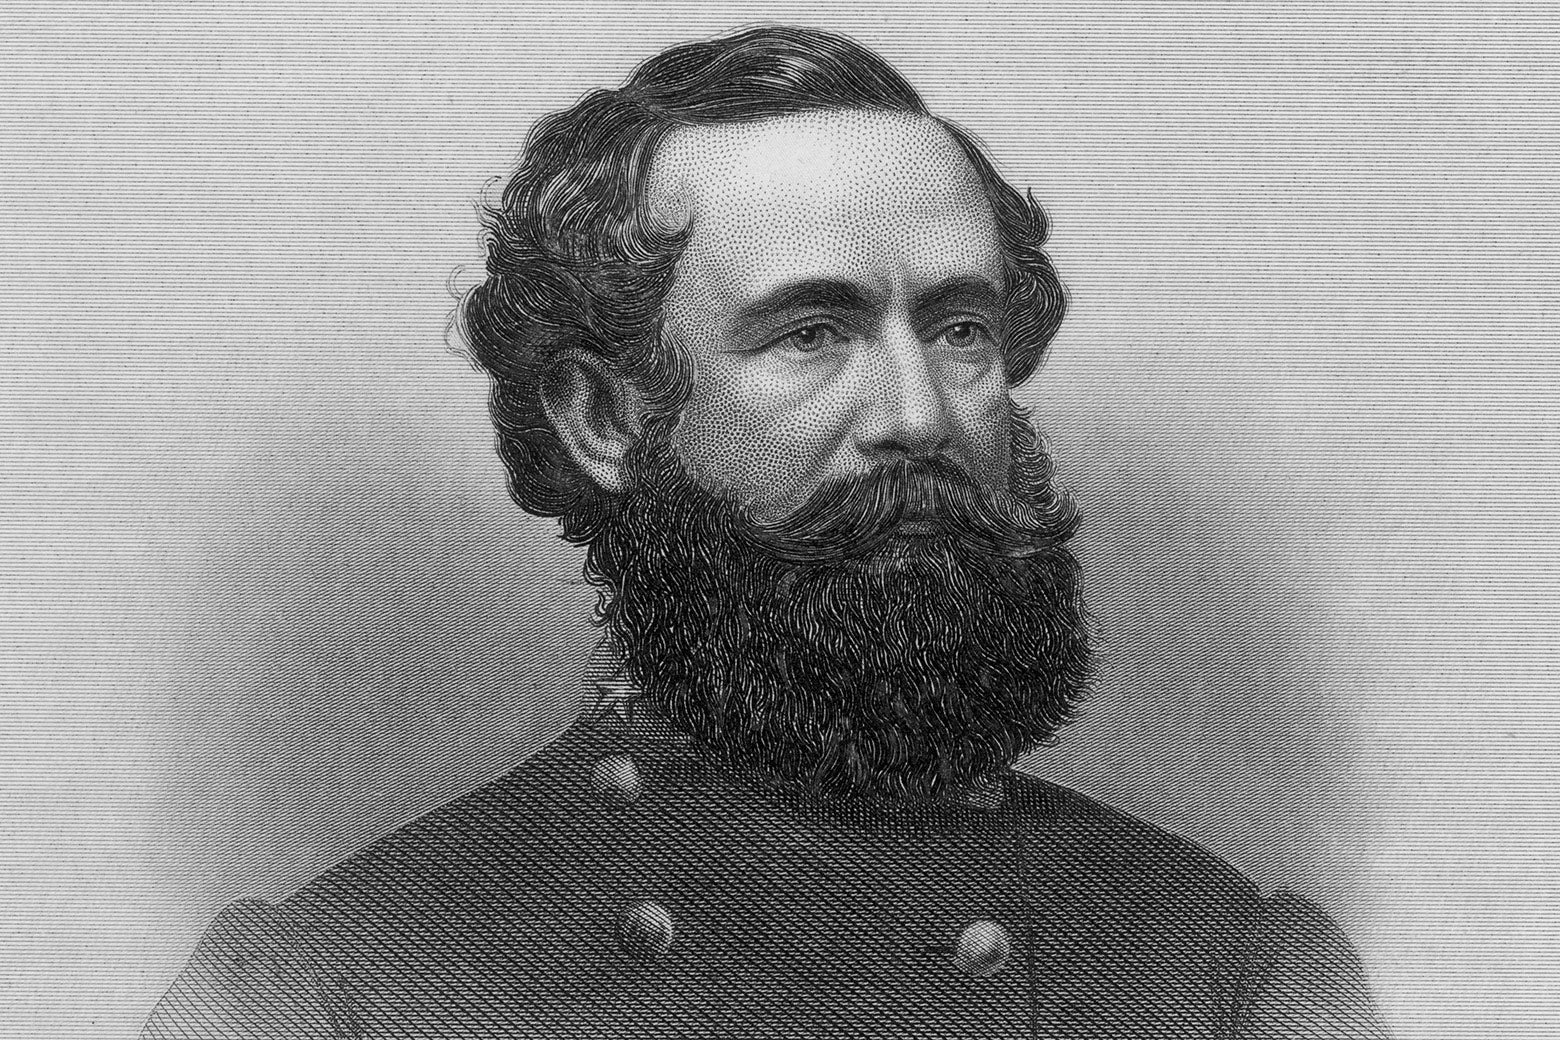 A black-and-white illustration of a dark-haired man with a large beard wearing what appears to be a military jacket.